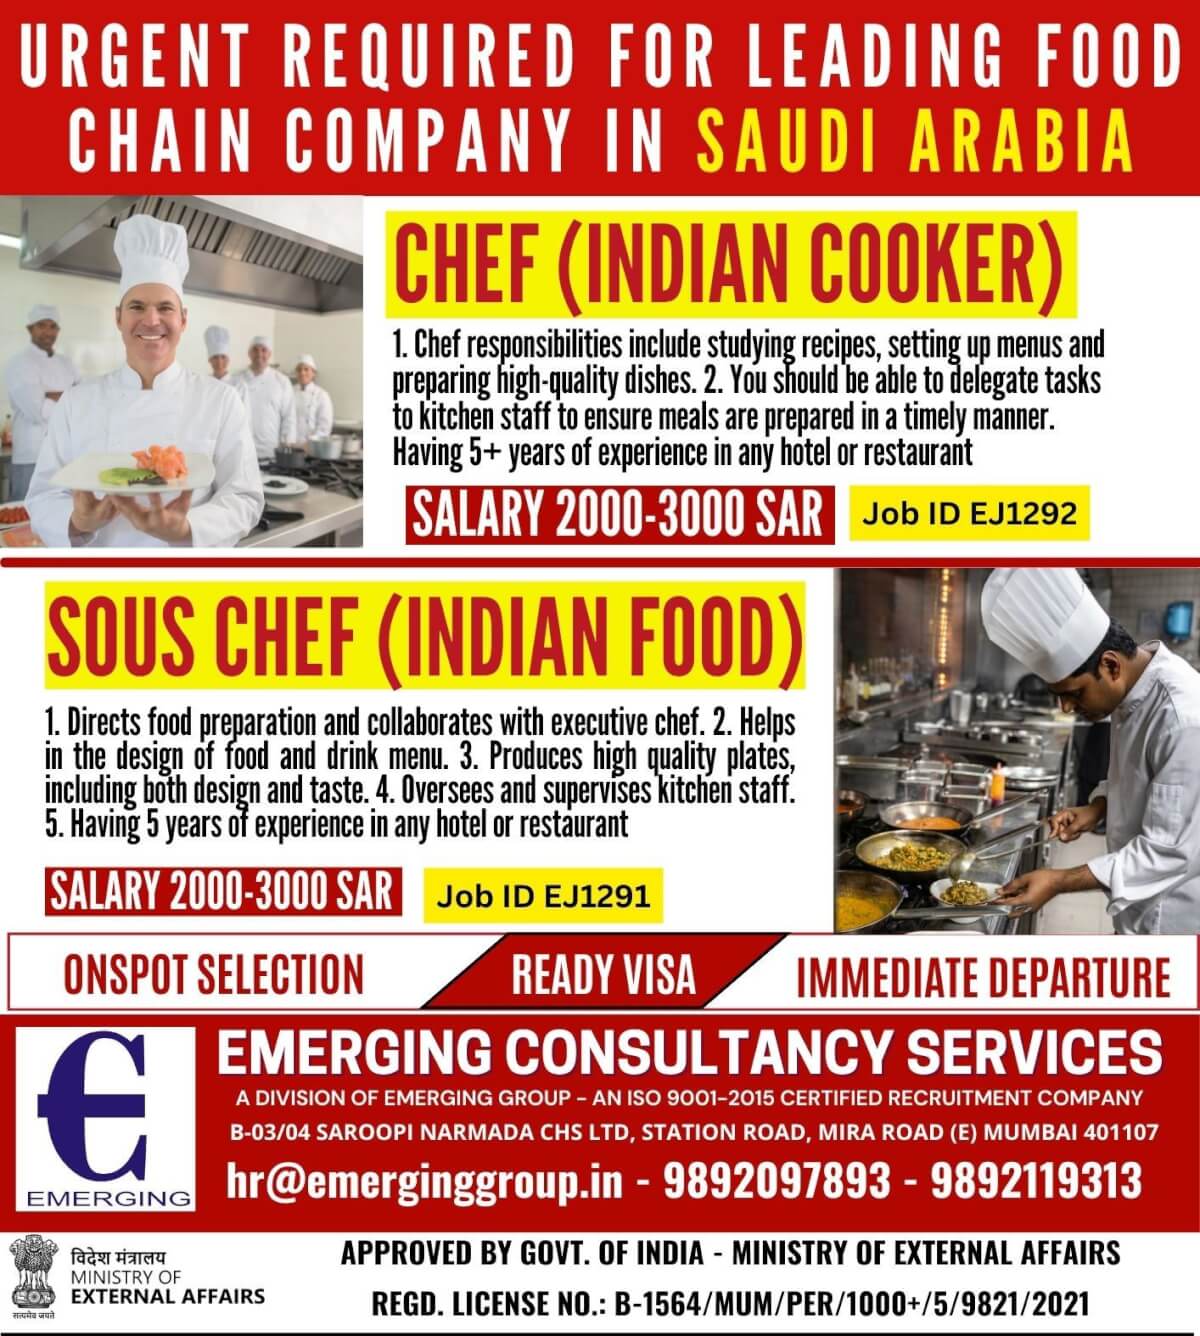 URGENTLY REQUIRED FOR LEADING FOOD CHAIN COMPANY IN SAUDI ARABIA